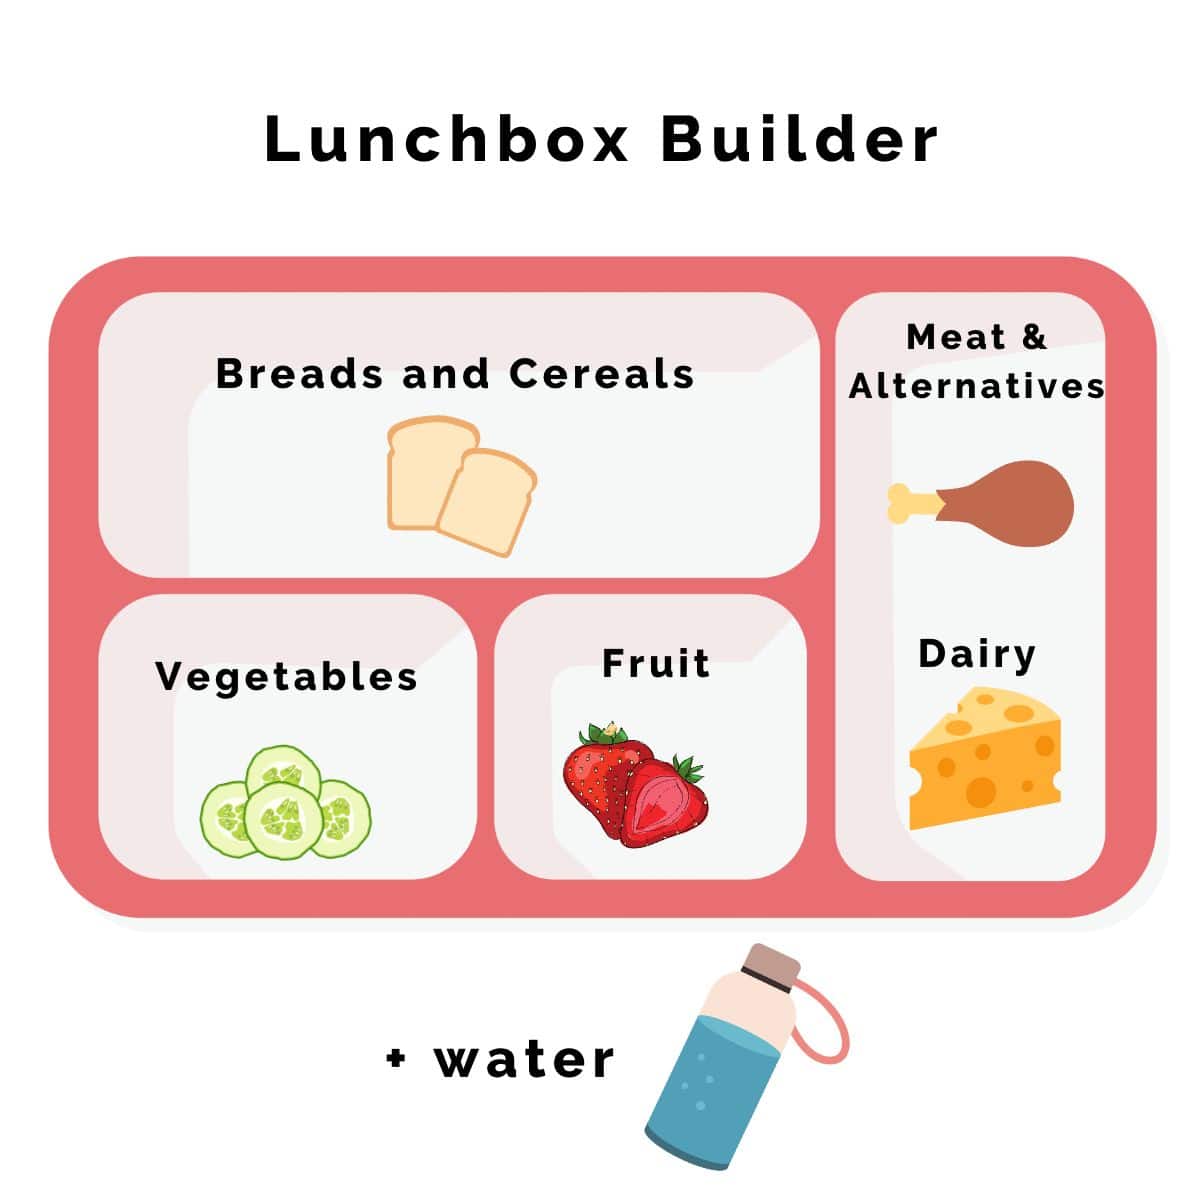 Graphic Bento Lunchbox Image With 5 Sections Each with Titles and Matching Images 1)Breads and Cereals 2)Meat & Alternatives 3)Vegetables 4)Fruit 5)Dairy